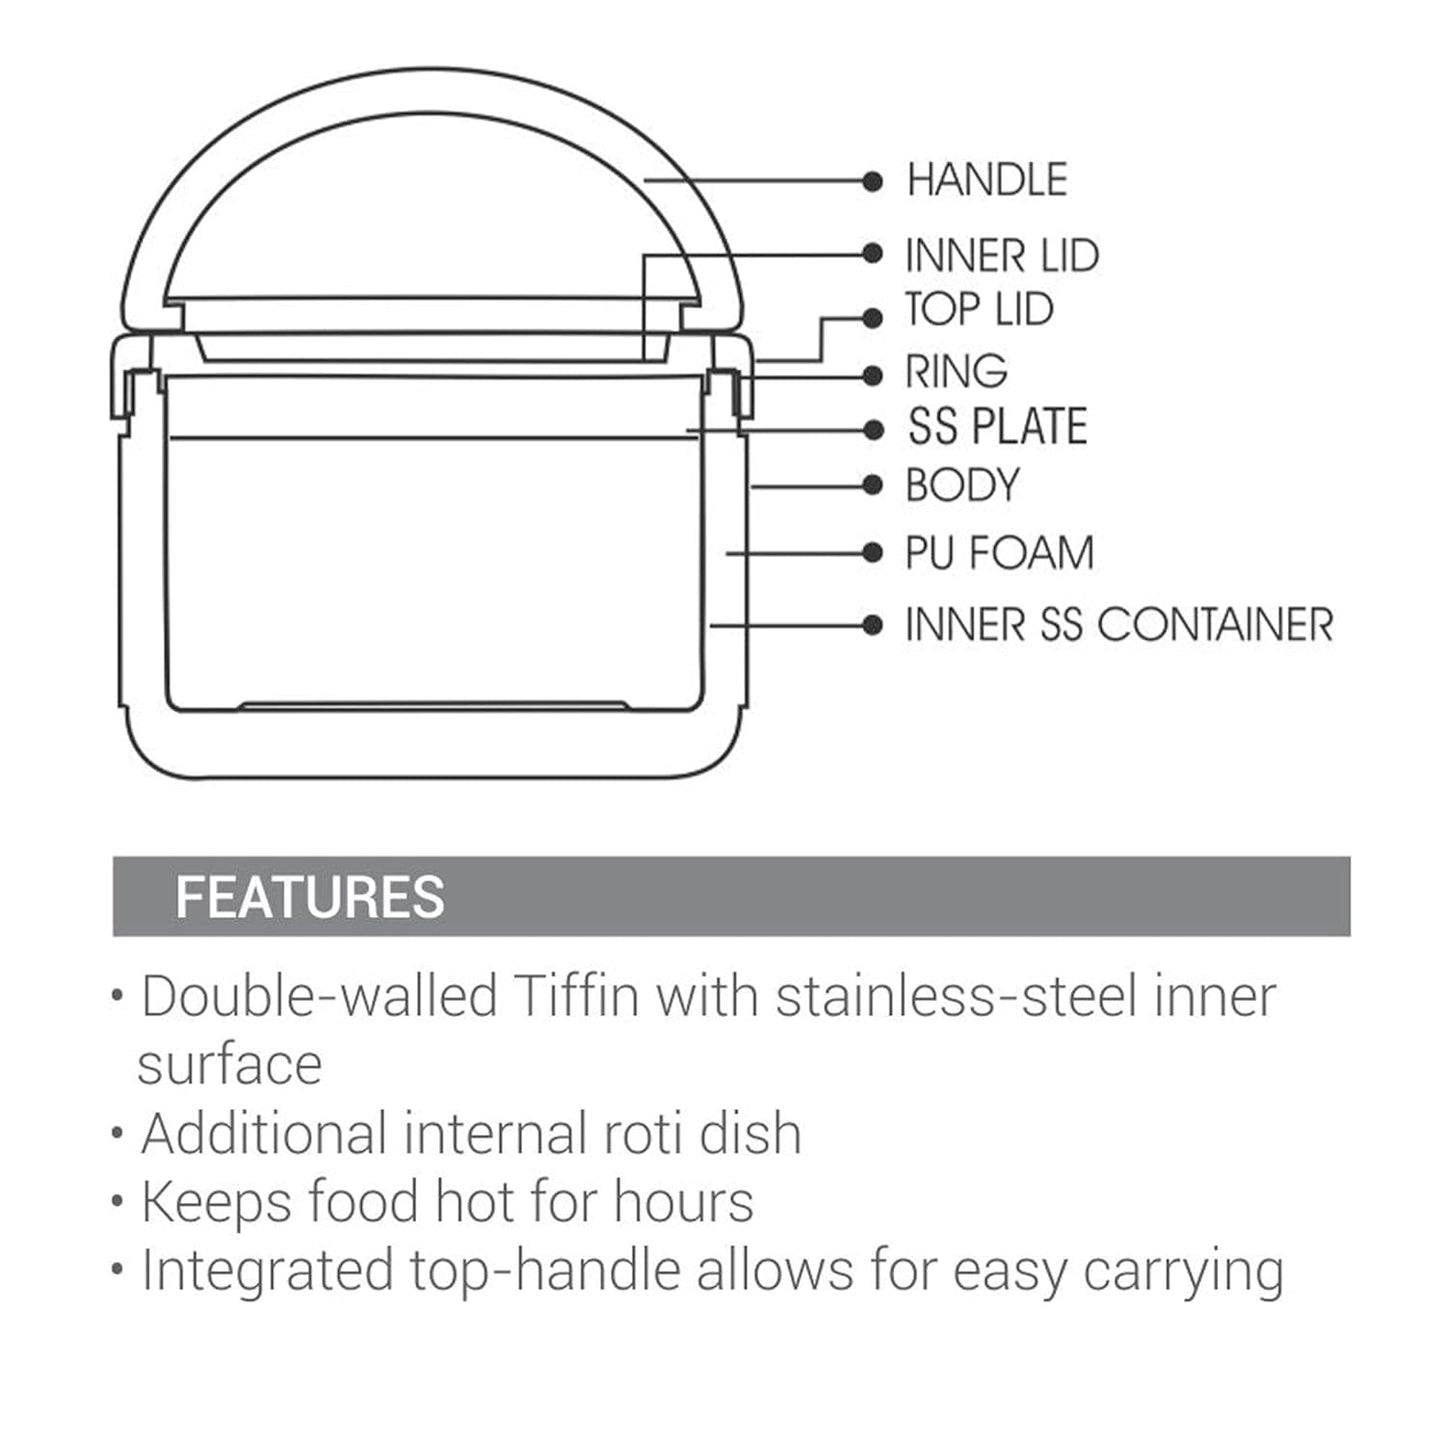 MILTON Big Bite Insulated Inner Stainless Steel Tiffin Box with Additional Plate and Handle